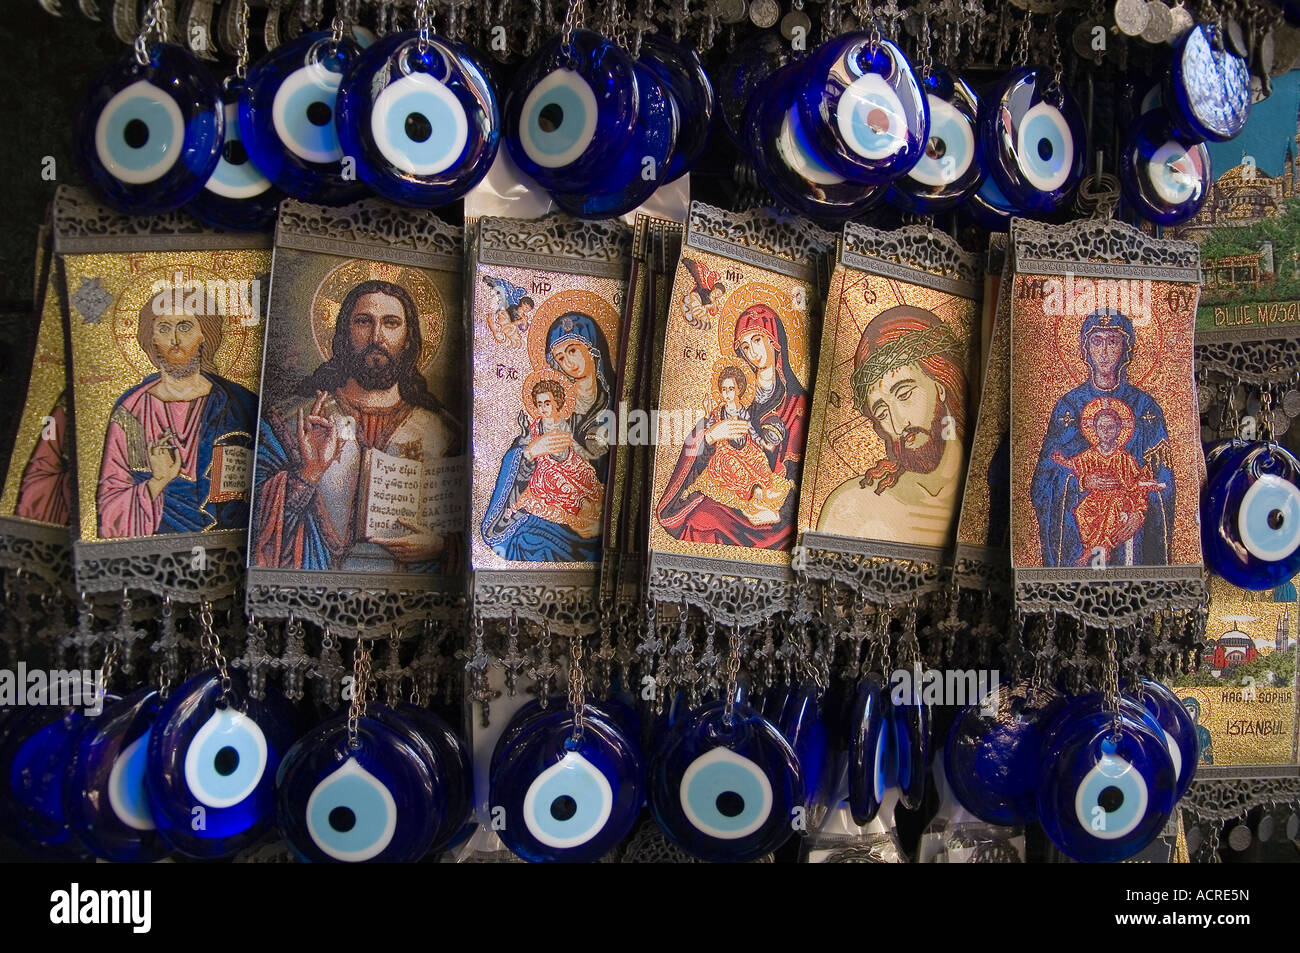 Christian hangings with protective evil eye amulets known as nazar boncuk in Turkish. Tourist gift stall Istanbul, Turkey Stock Photo